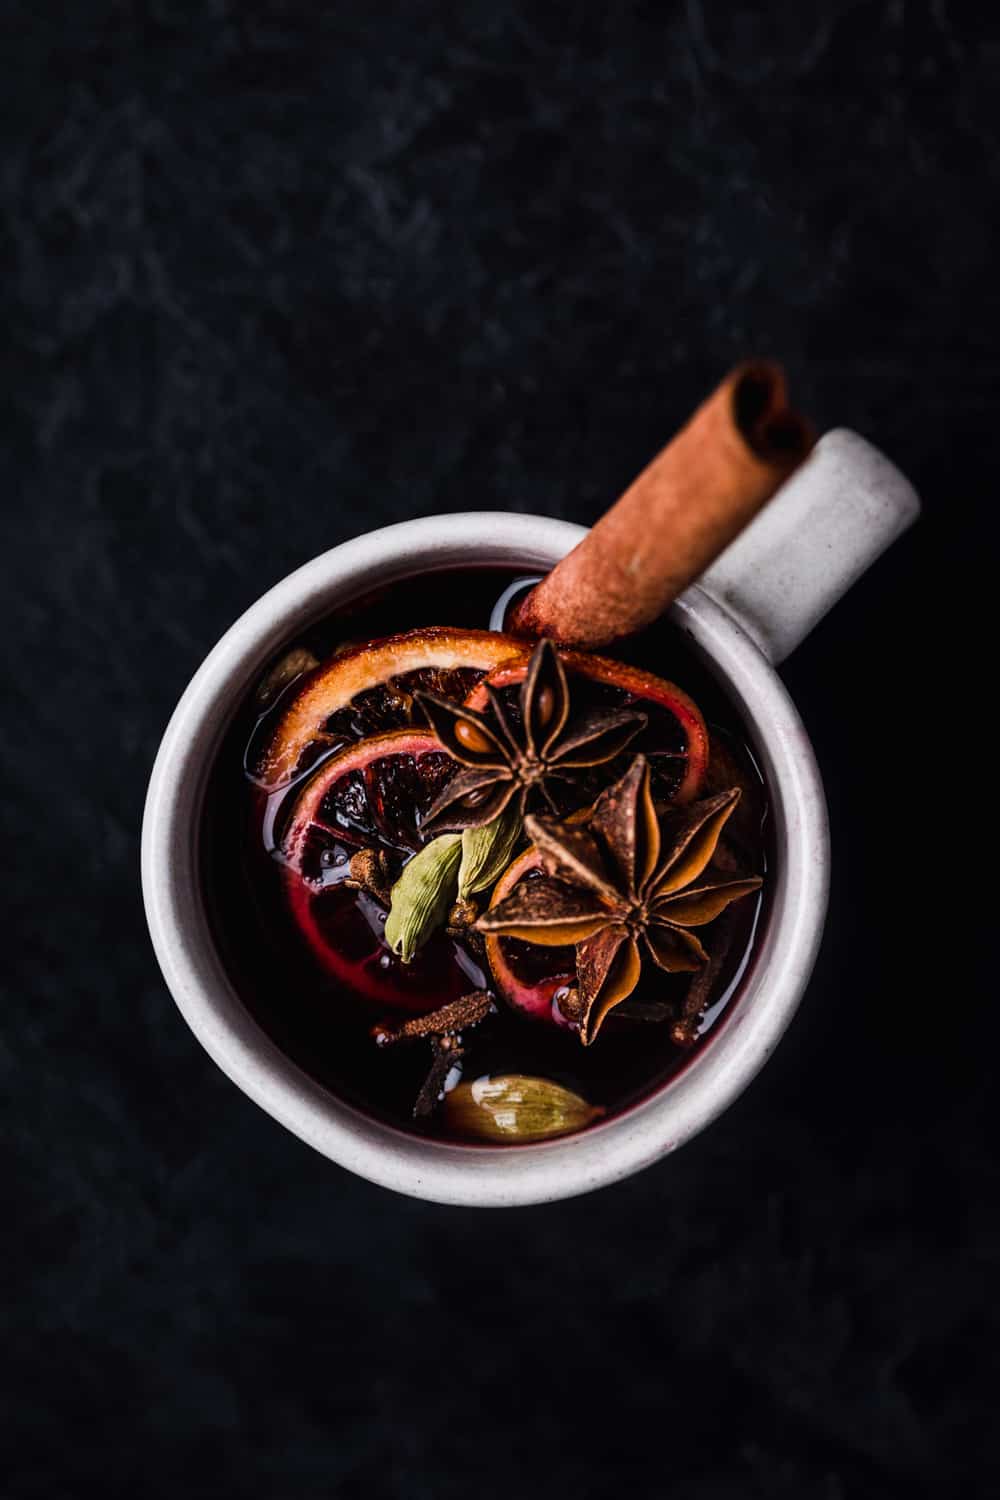 Spiced WIne and whole spices in a mug.